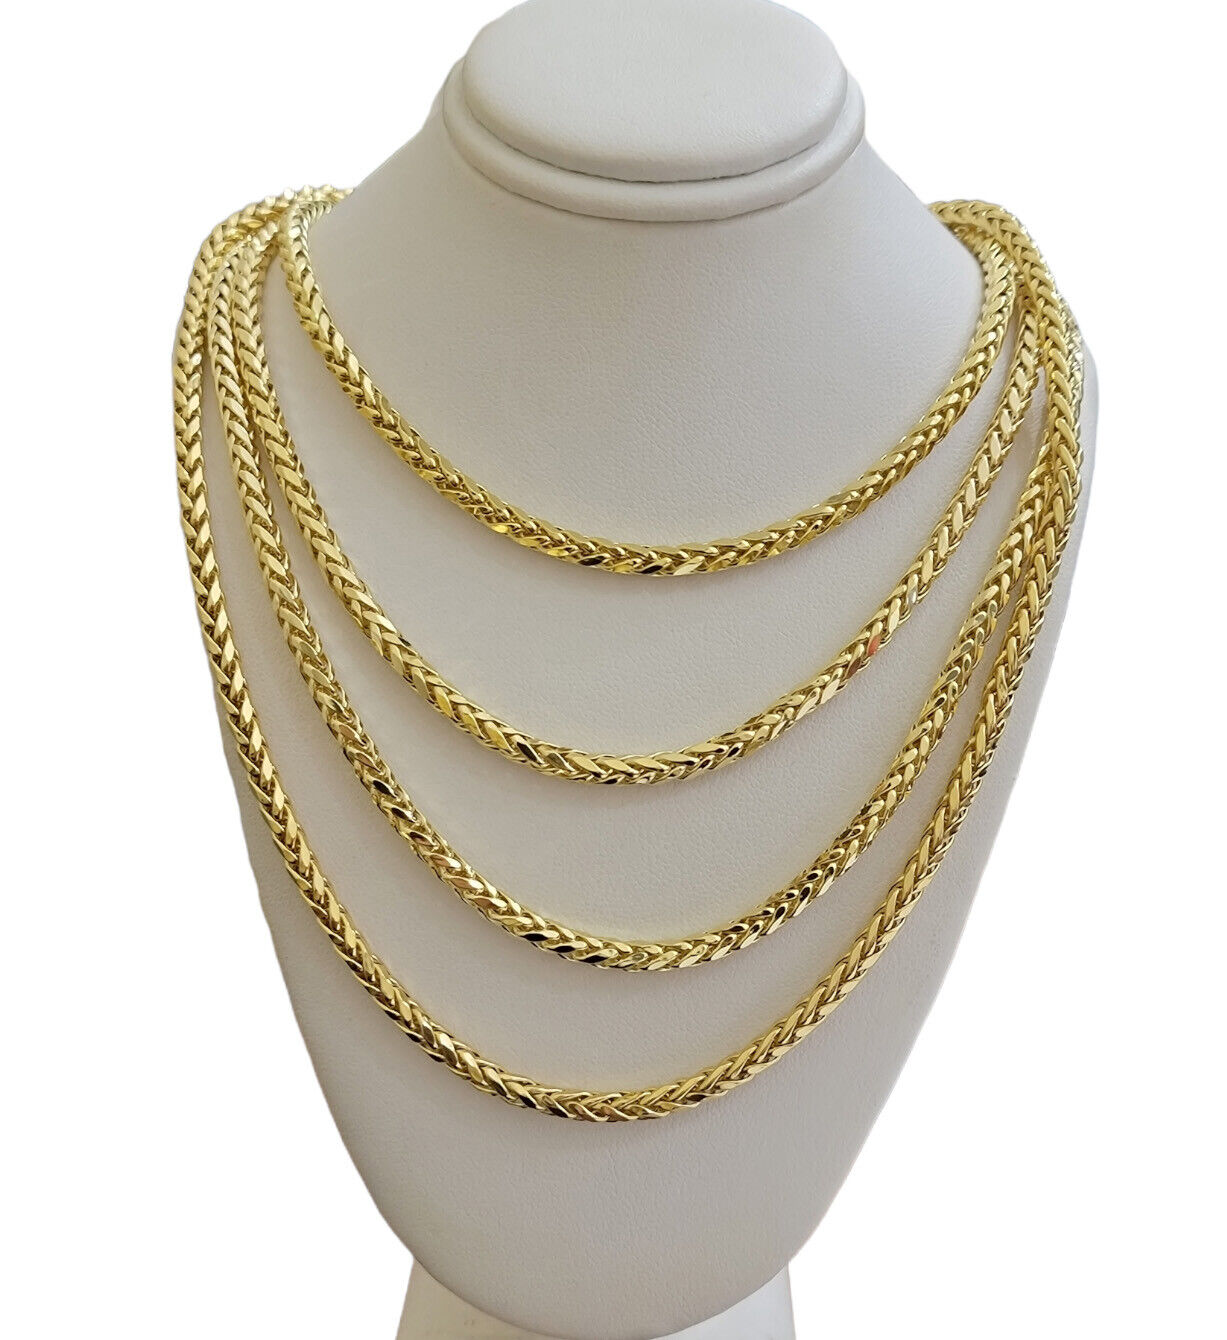 Real 10K Yellow Gold 4mm Wheat Palm Franco Spiga Chain Necklace 16